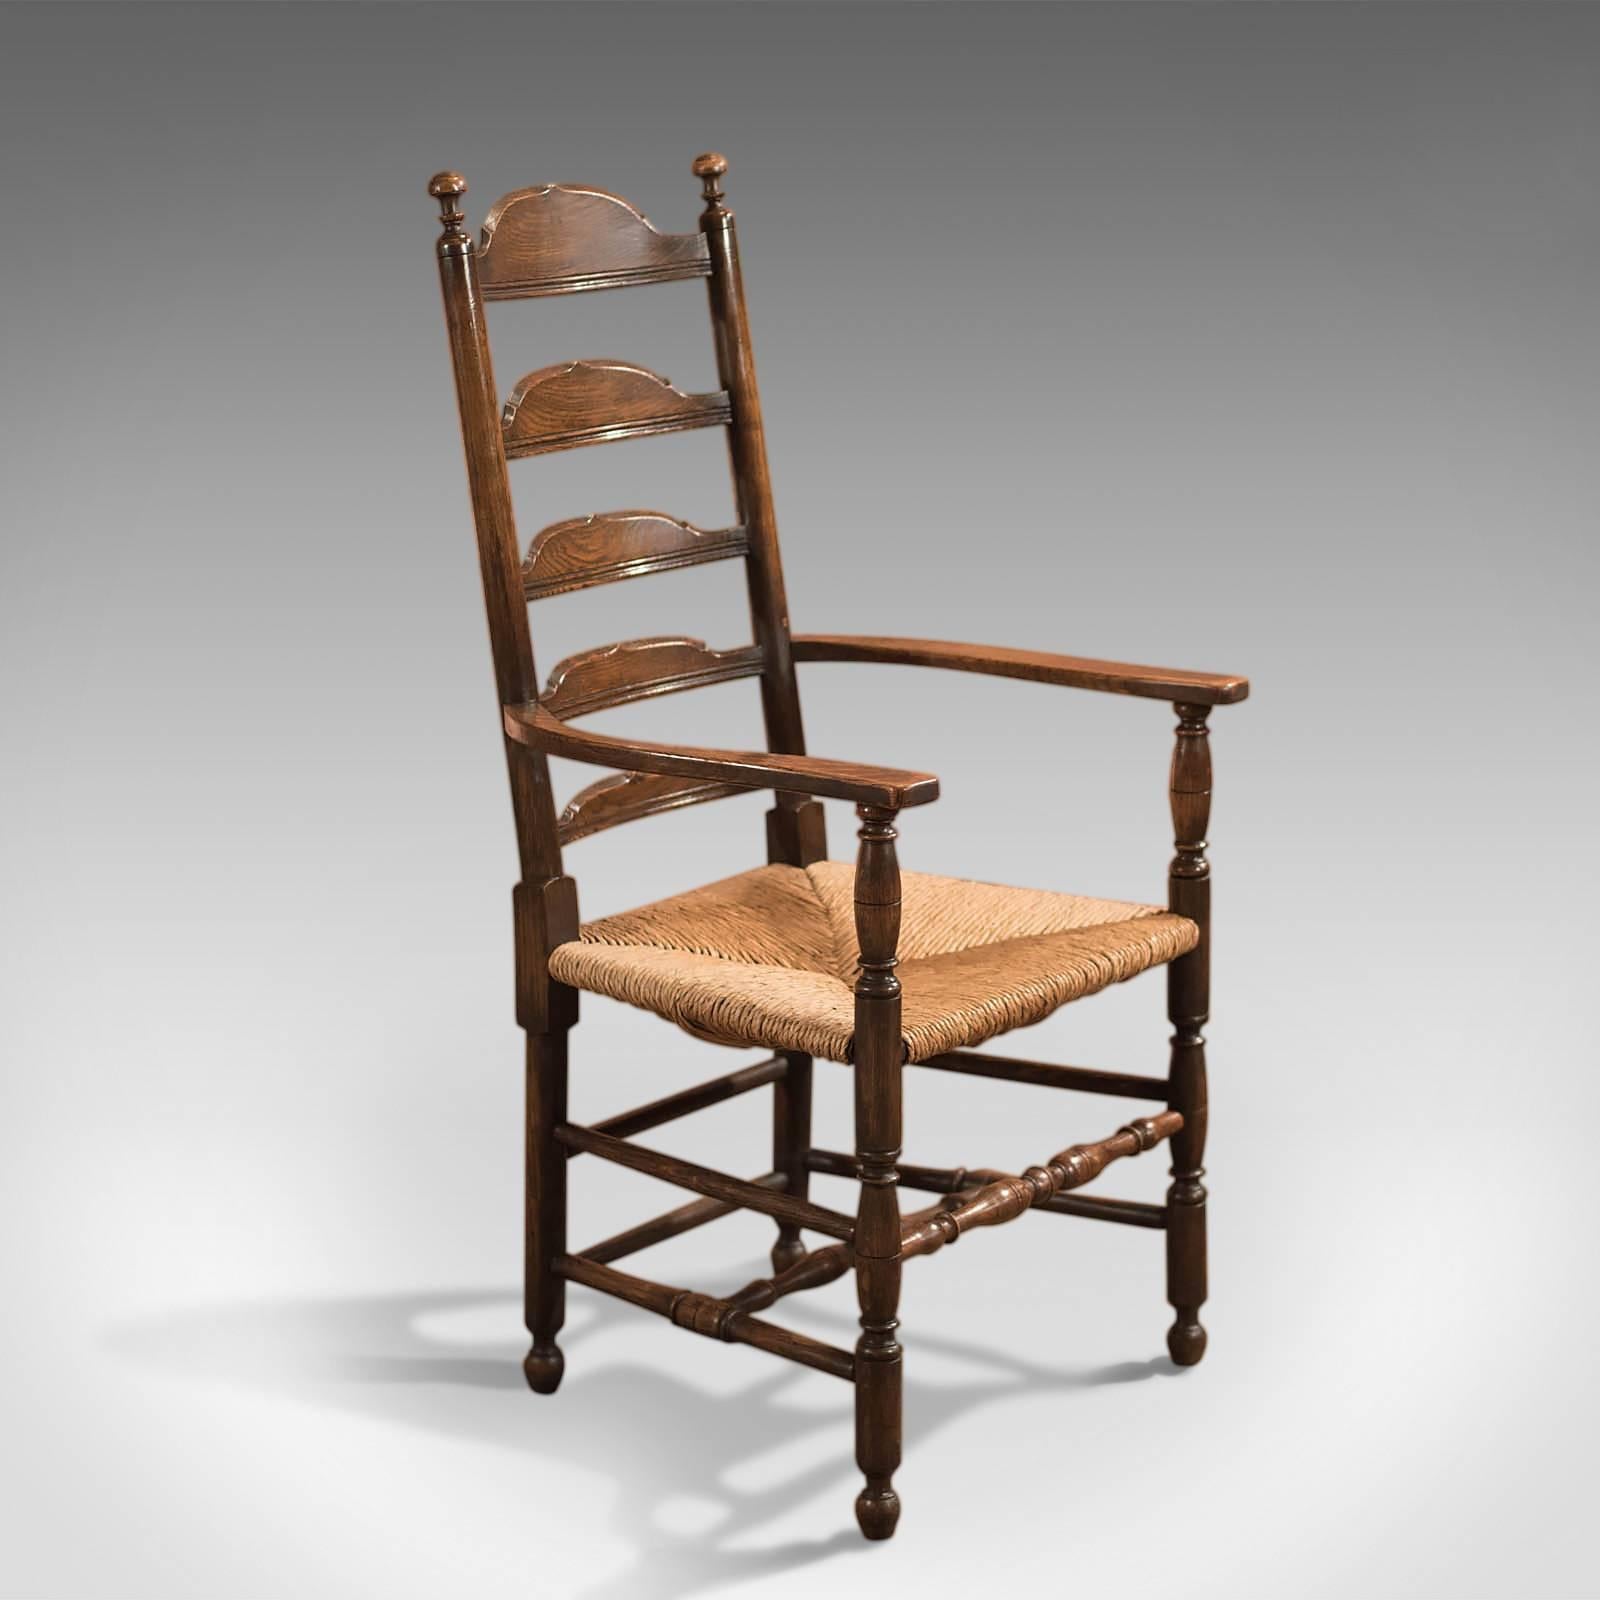 This is an antique Victorian ladder-back dining chair dating to circa 1900.

Raised on turned legs united by a box stretcher this carver is in fine order crafted in English oak with a rich warm patina and good colour.

The shaped armrests sit